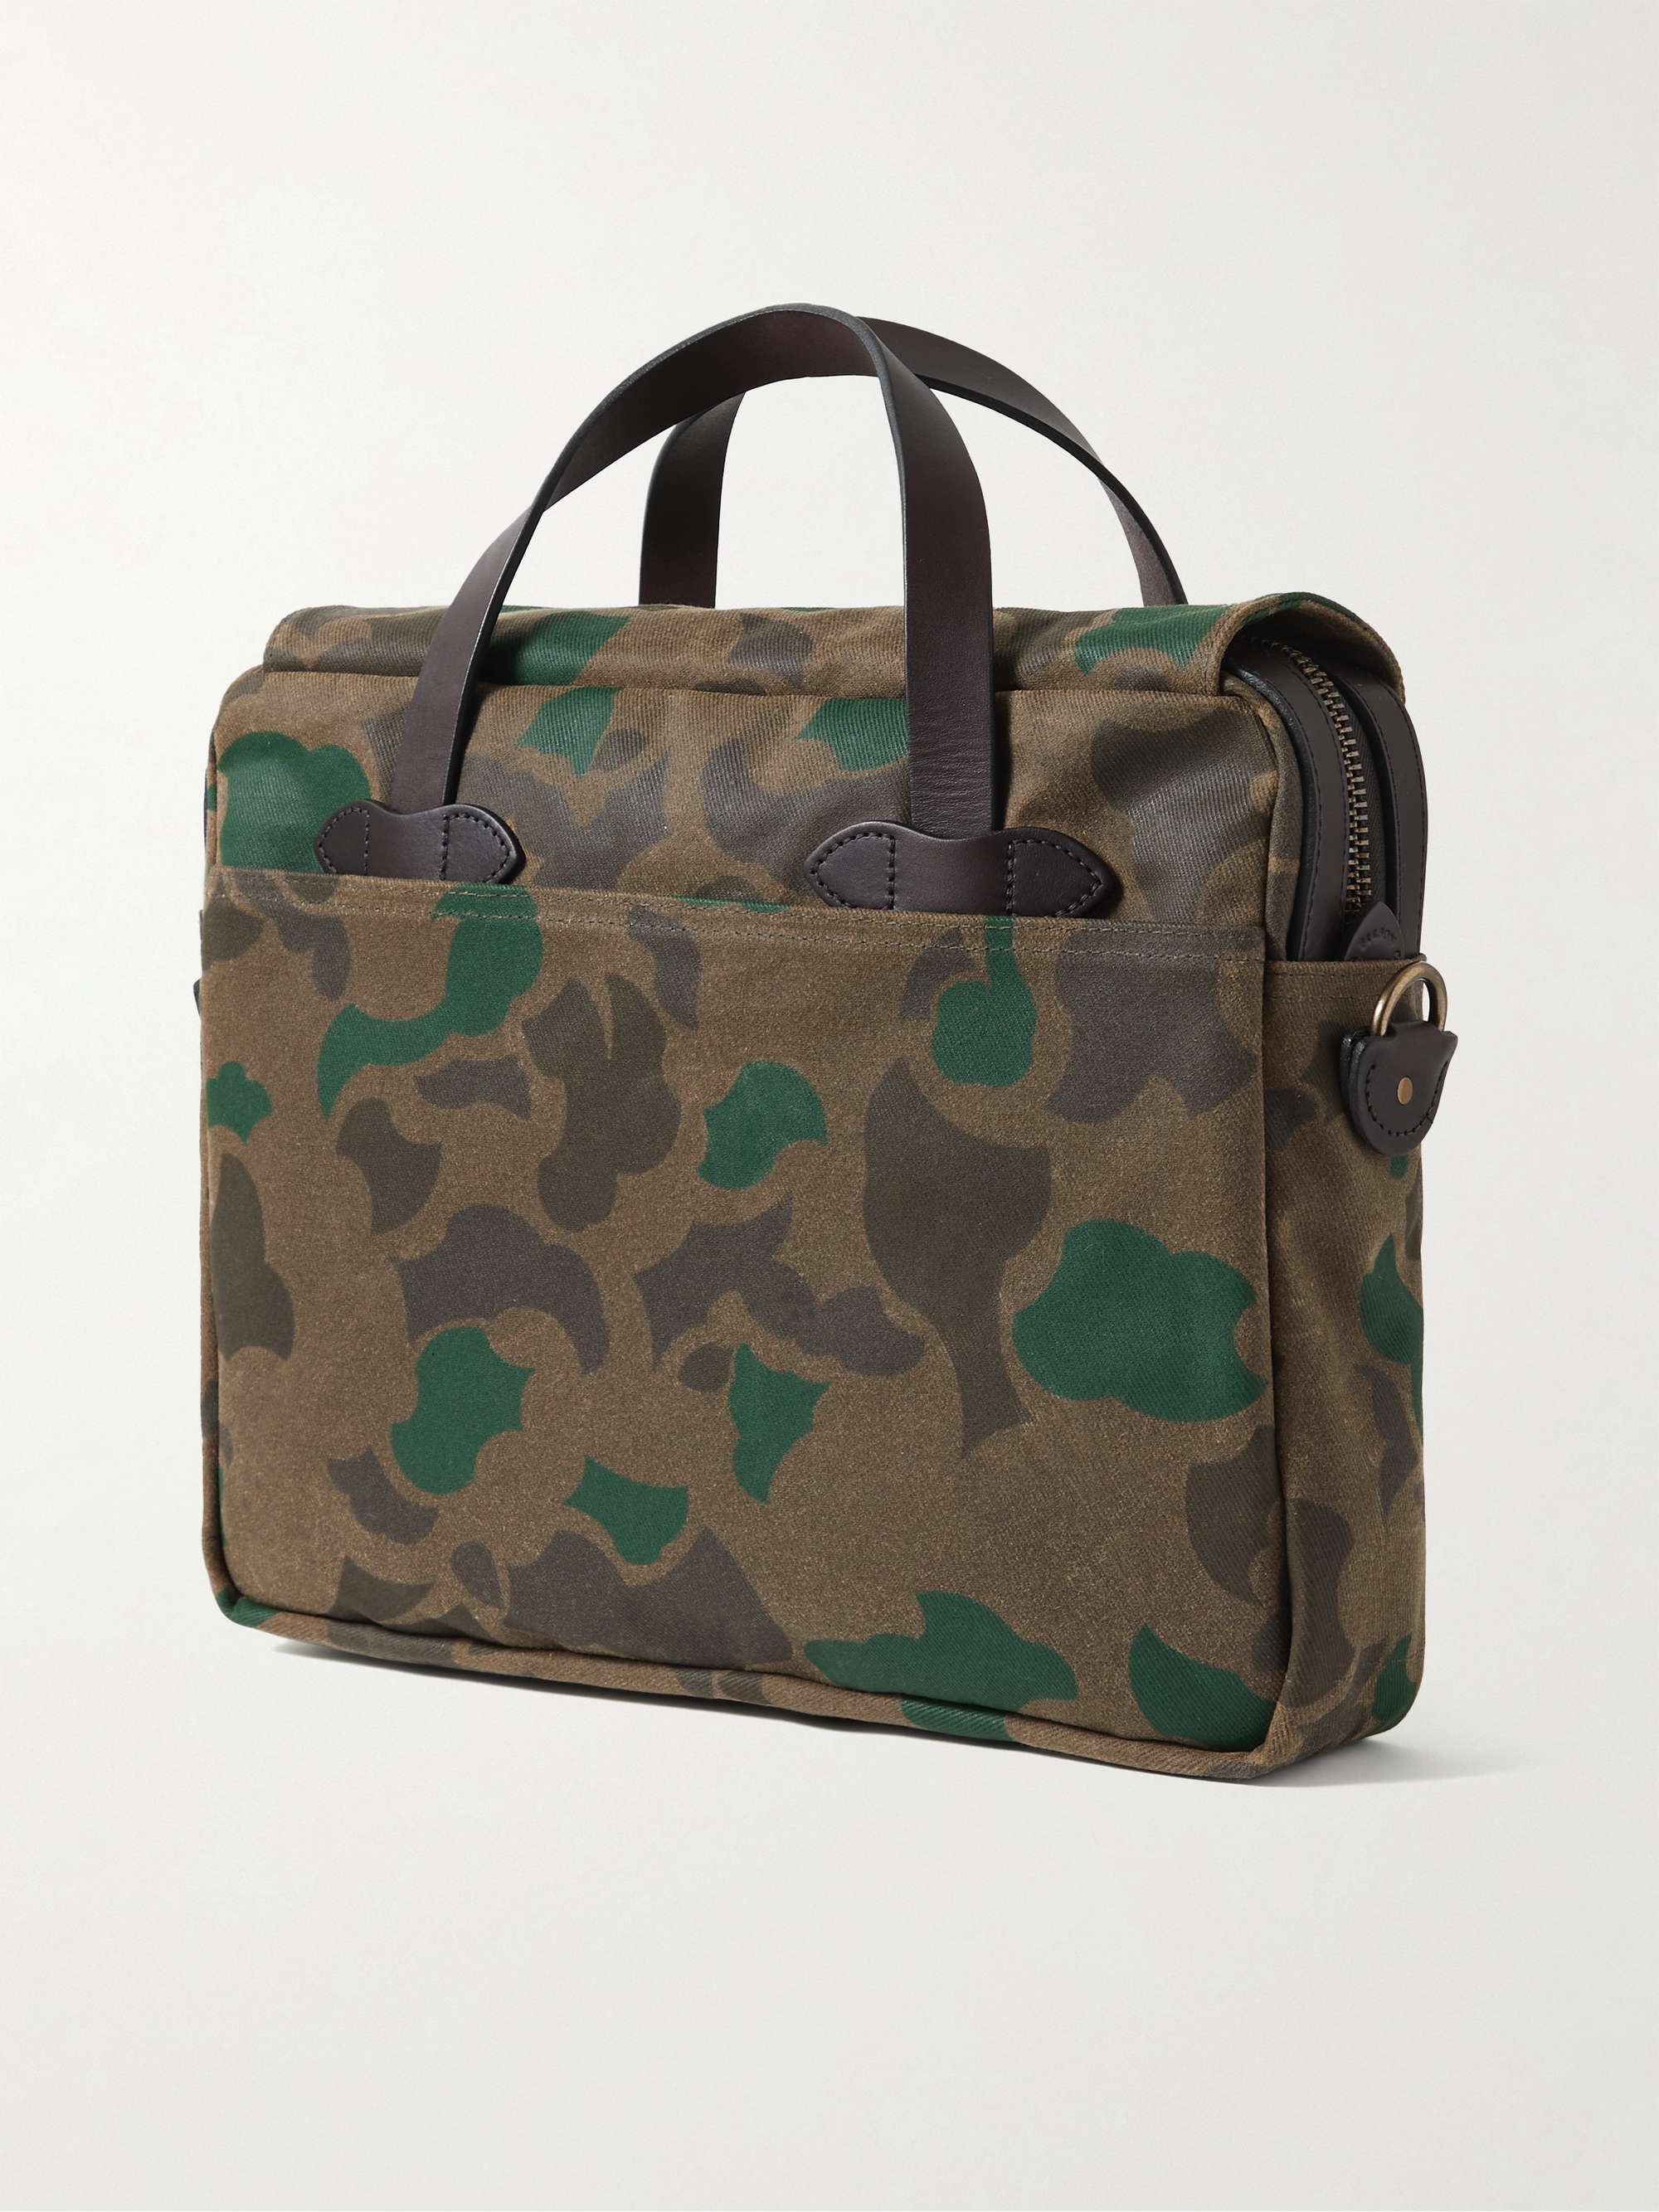 FILSON Original Leather-Trimmed Camouflage-Print Waxed Rugged Twill Briefcase